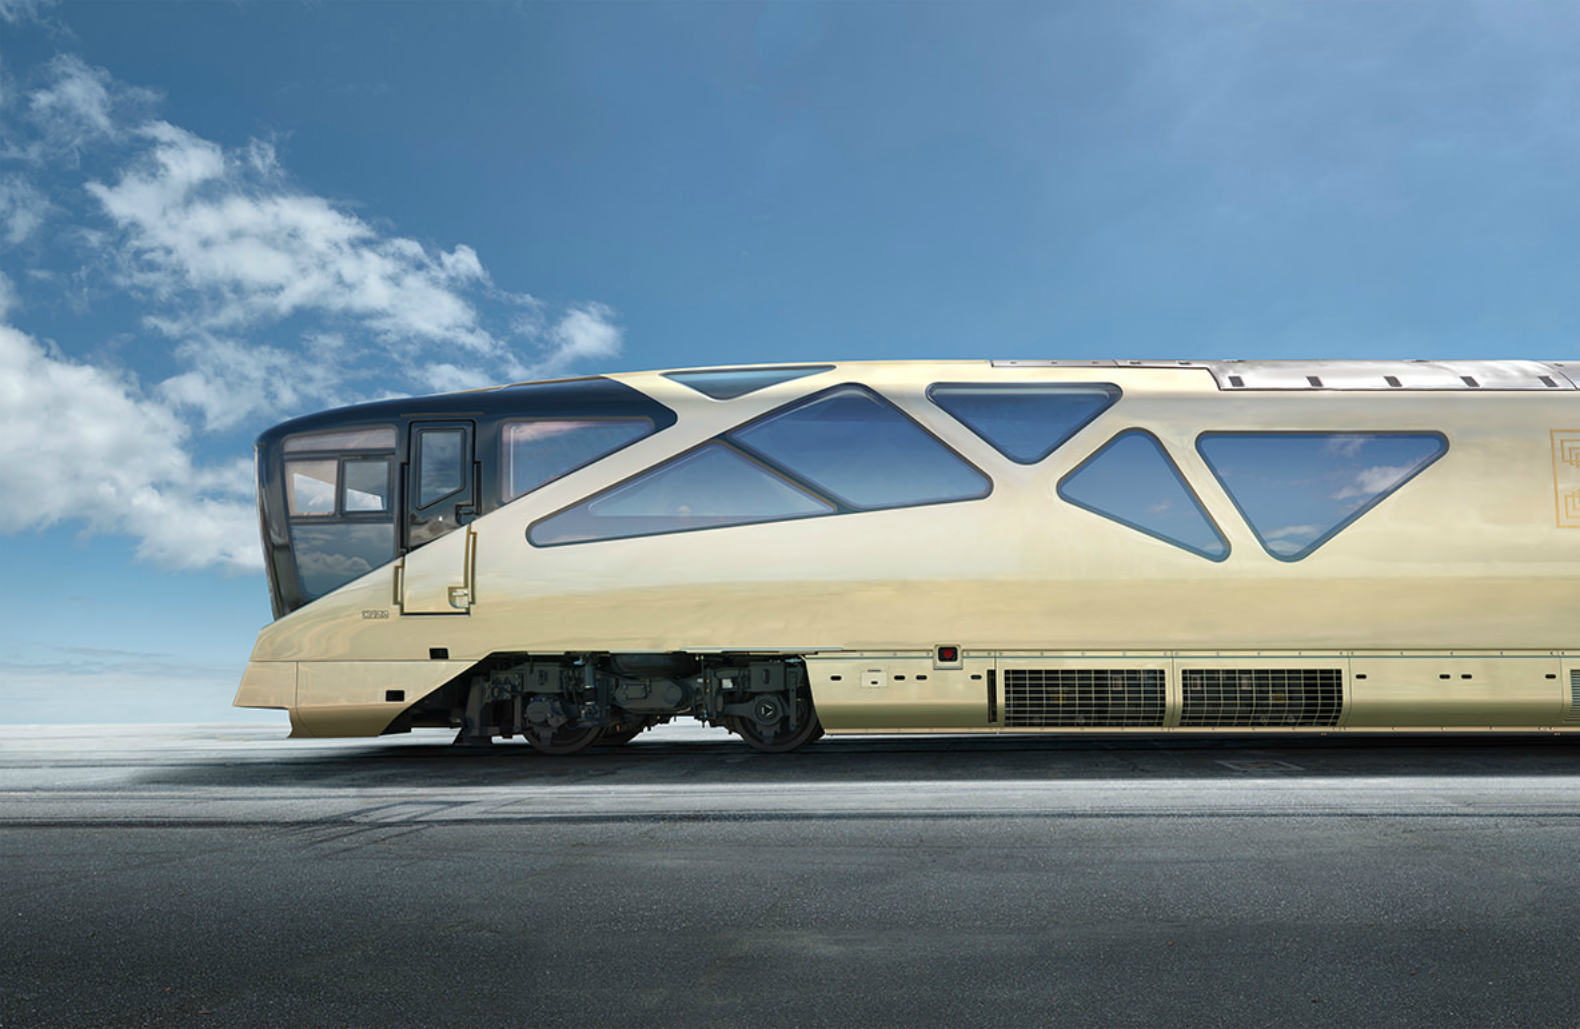 Japan’s Luxurious Shiki-Shima Sleeper Train Recently Launched and is Sold Out Until 2018